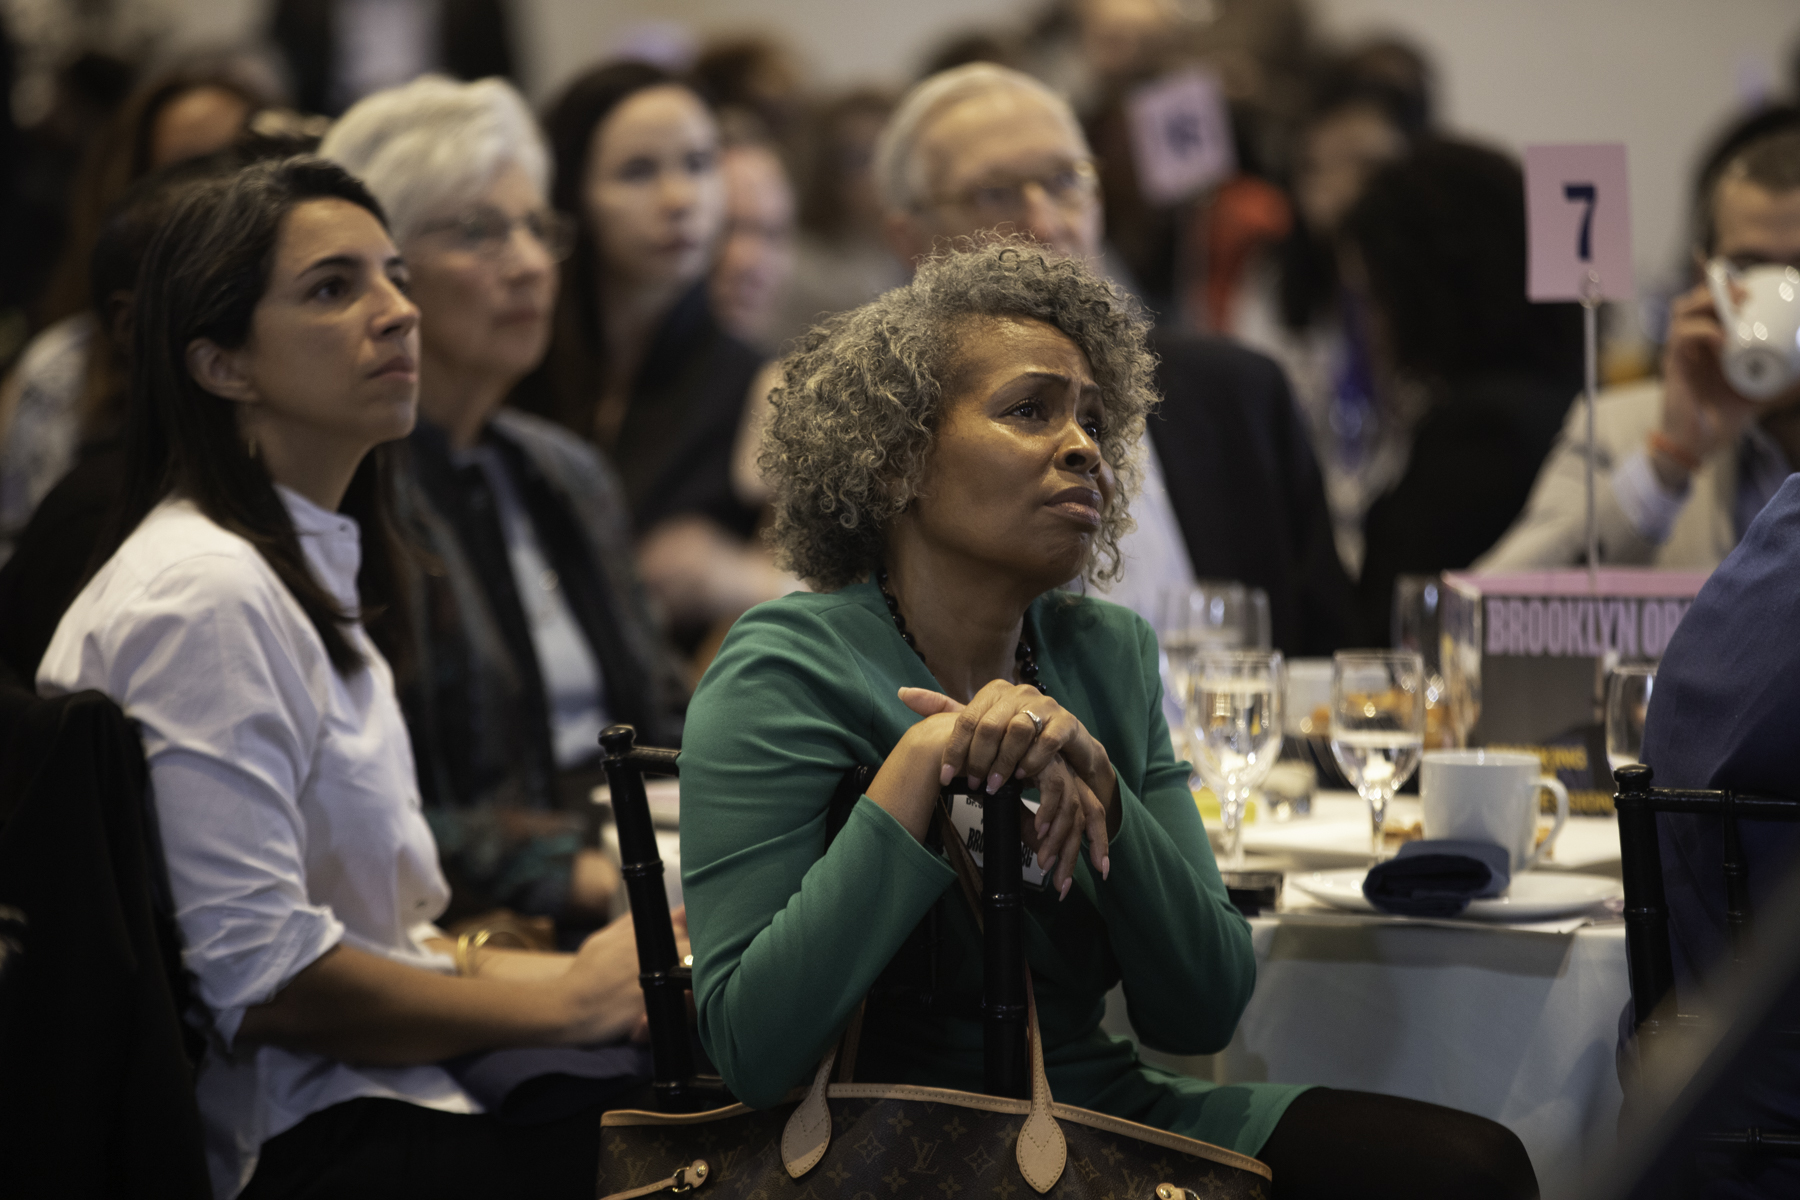 A group of attentive women sitting at a conference event, focusing on a speaker or presentation out of frame.